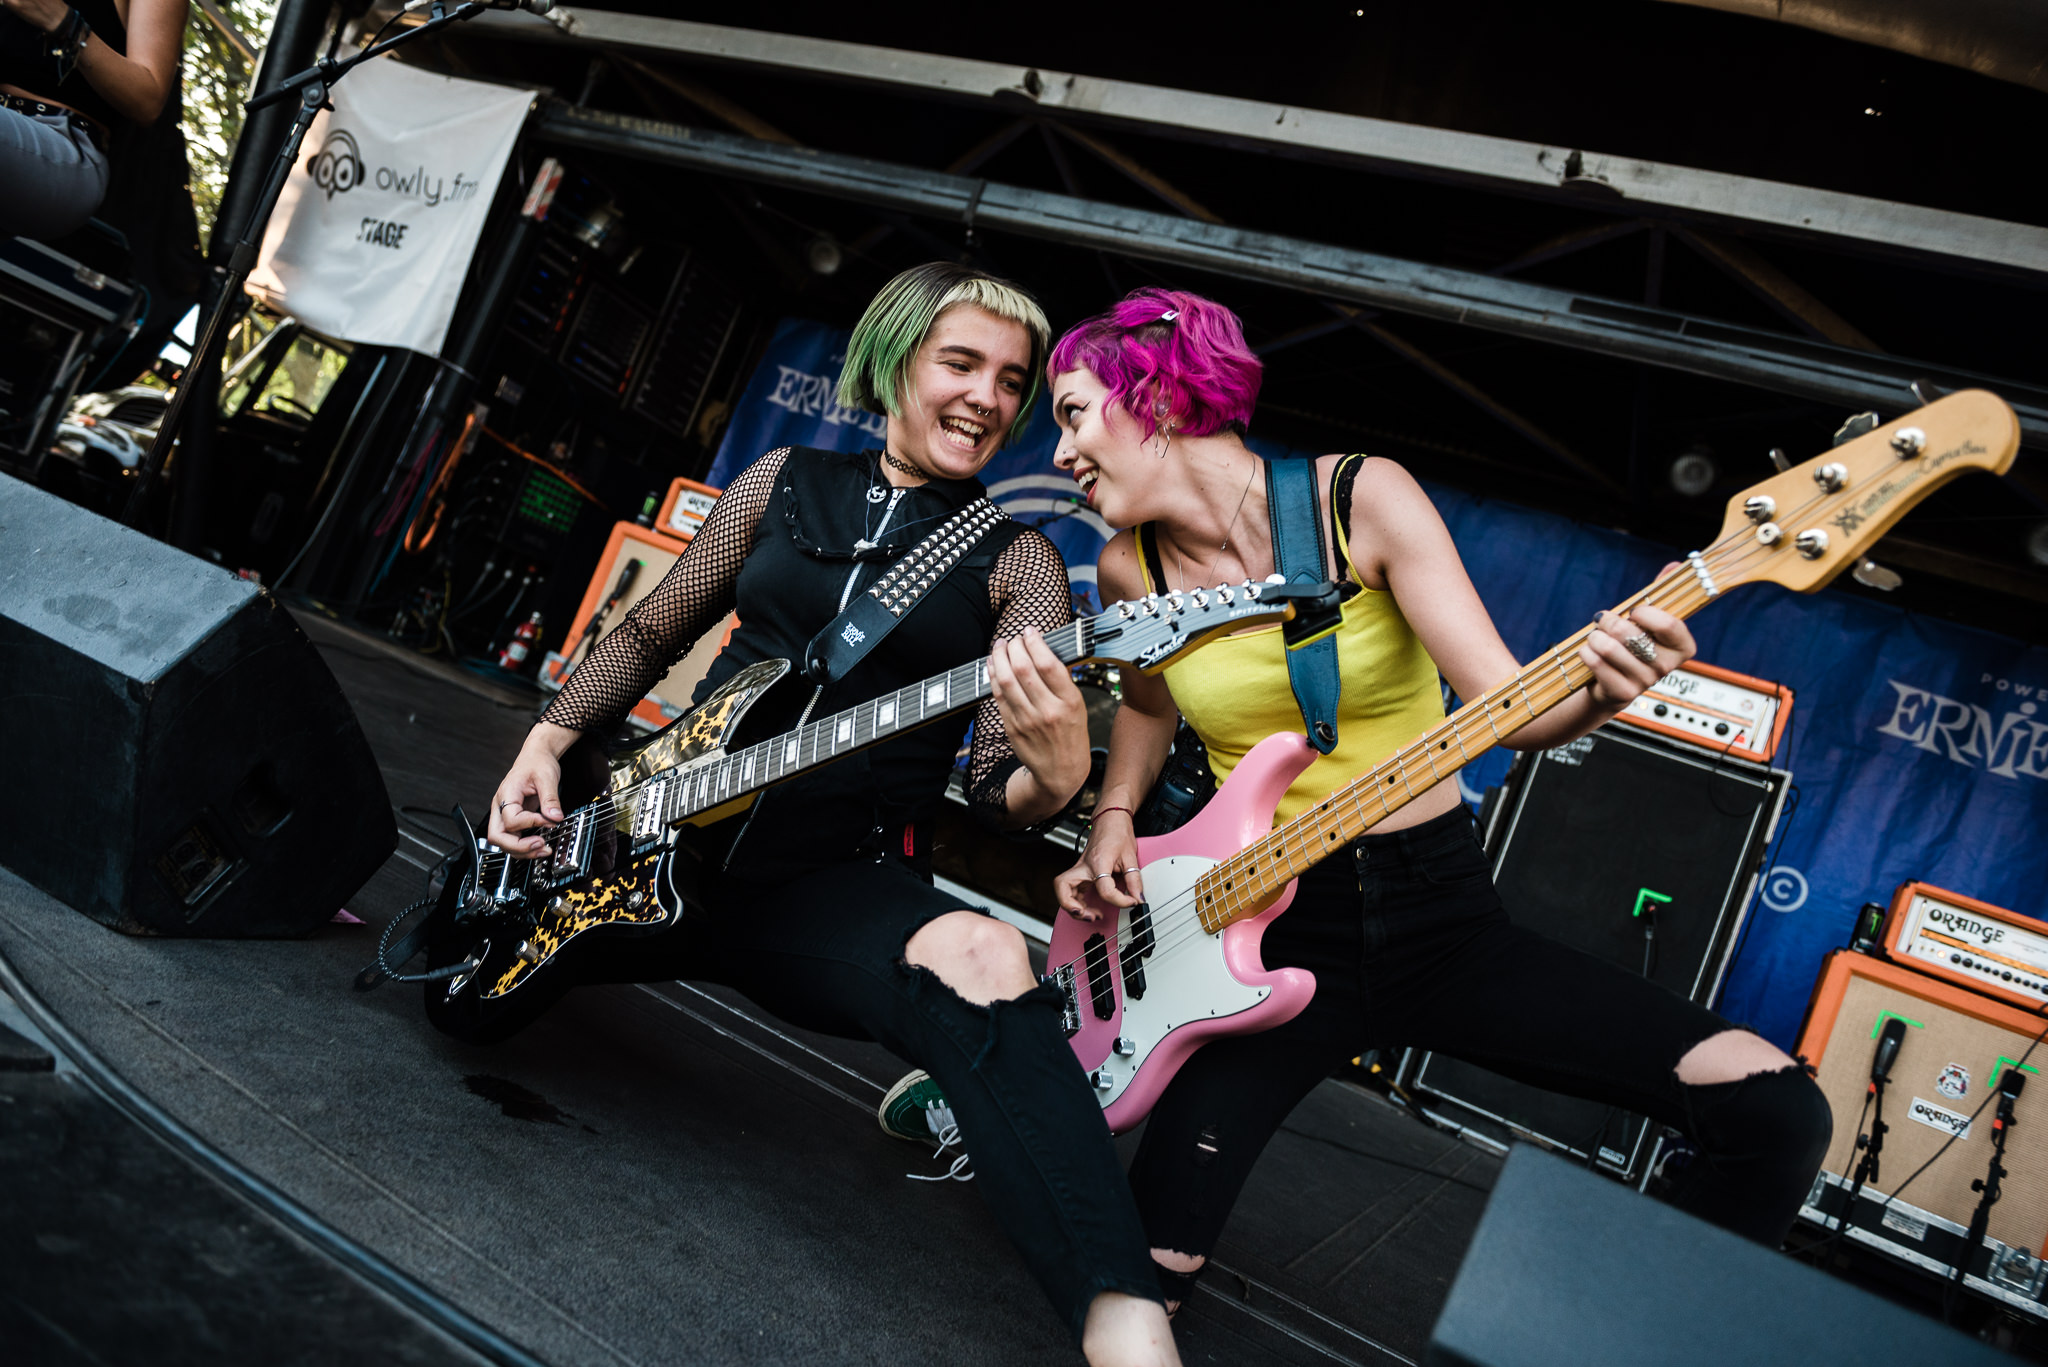 Doll Skin Warped Tour 2018 PNC Bank Arts Center Holmdel NJ Stars and Scars Photo